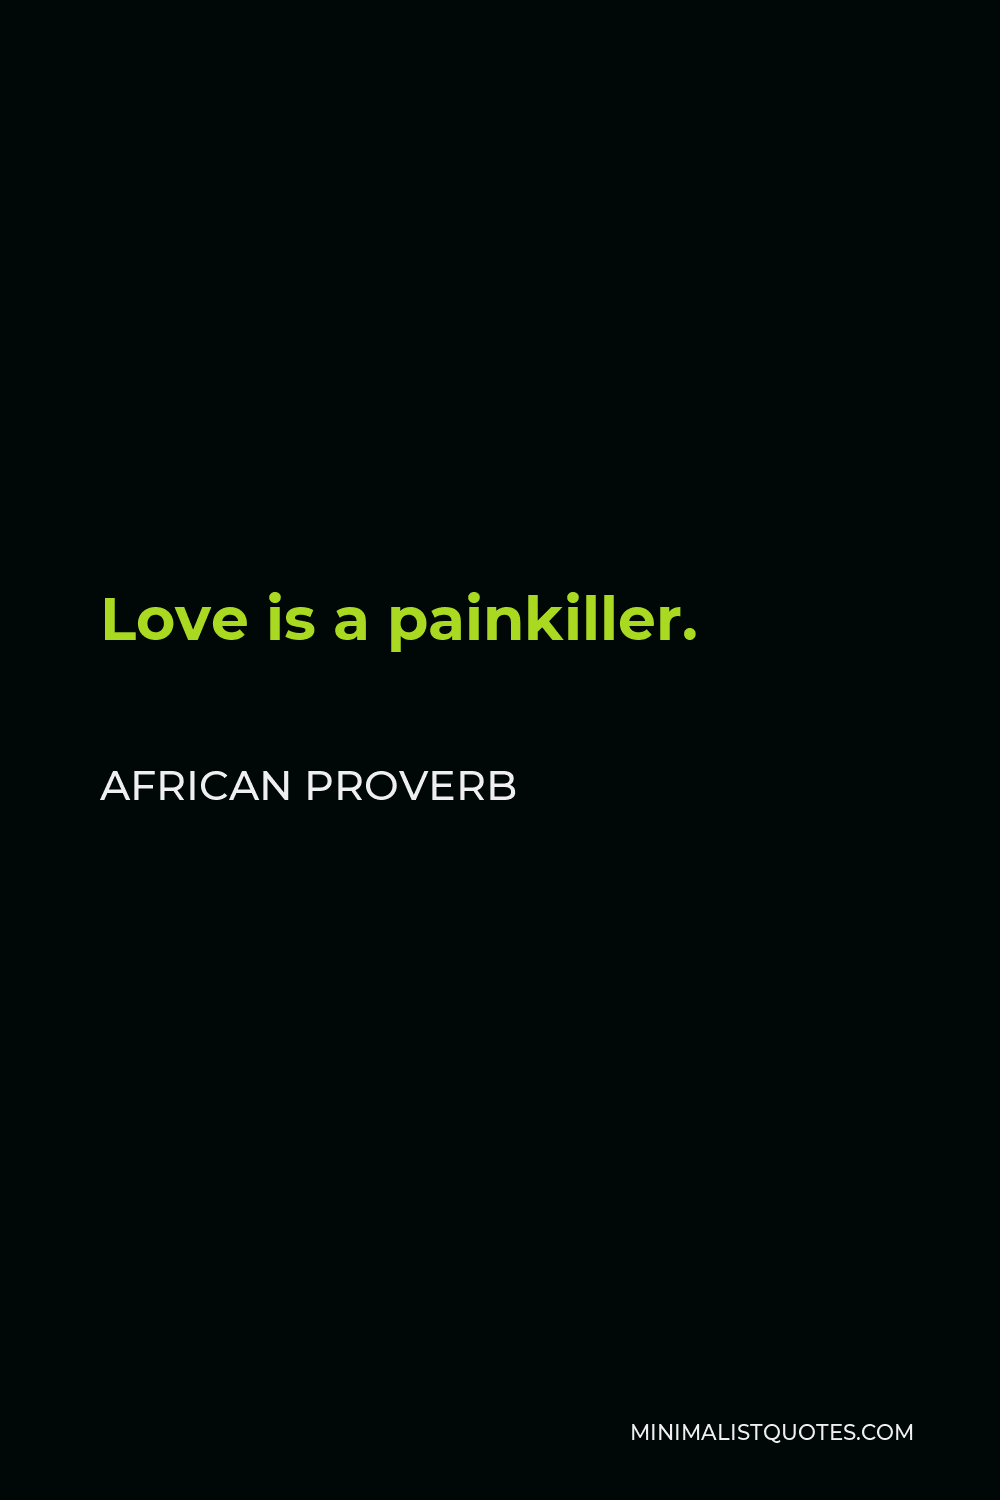 African Proverb Quote - Love is a painkiller.